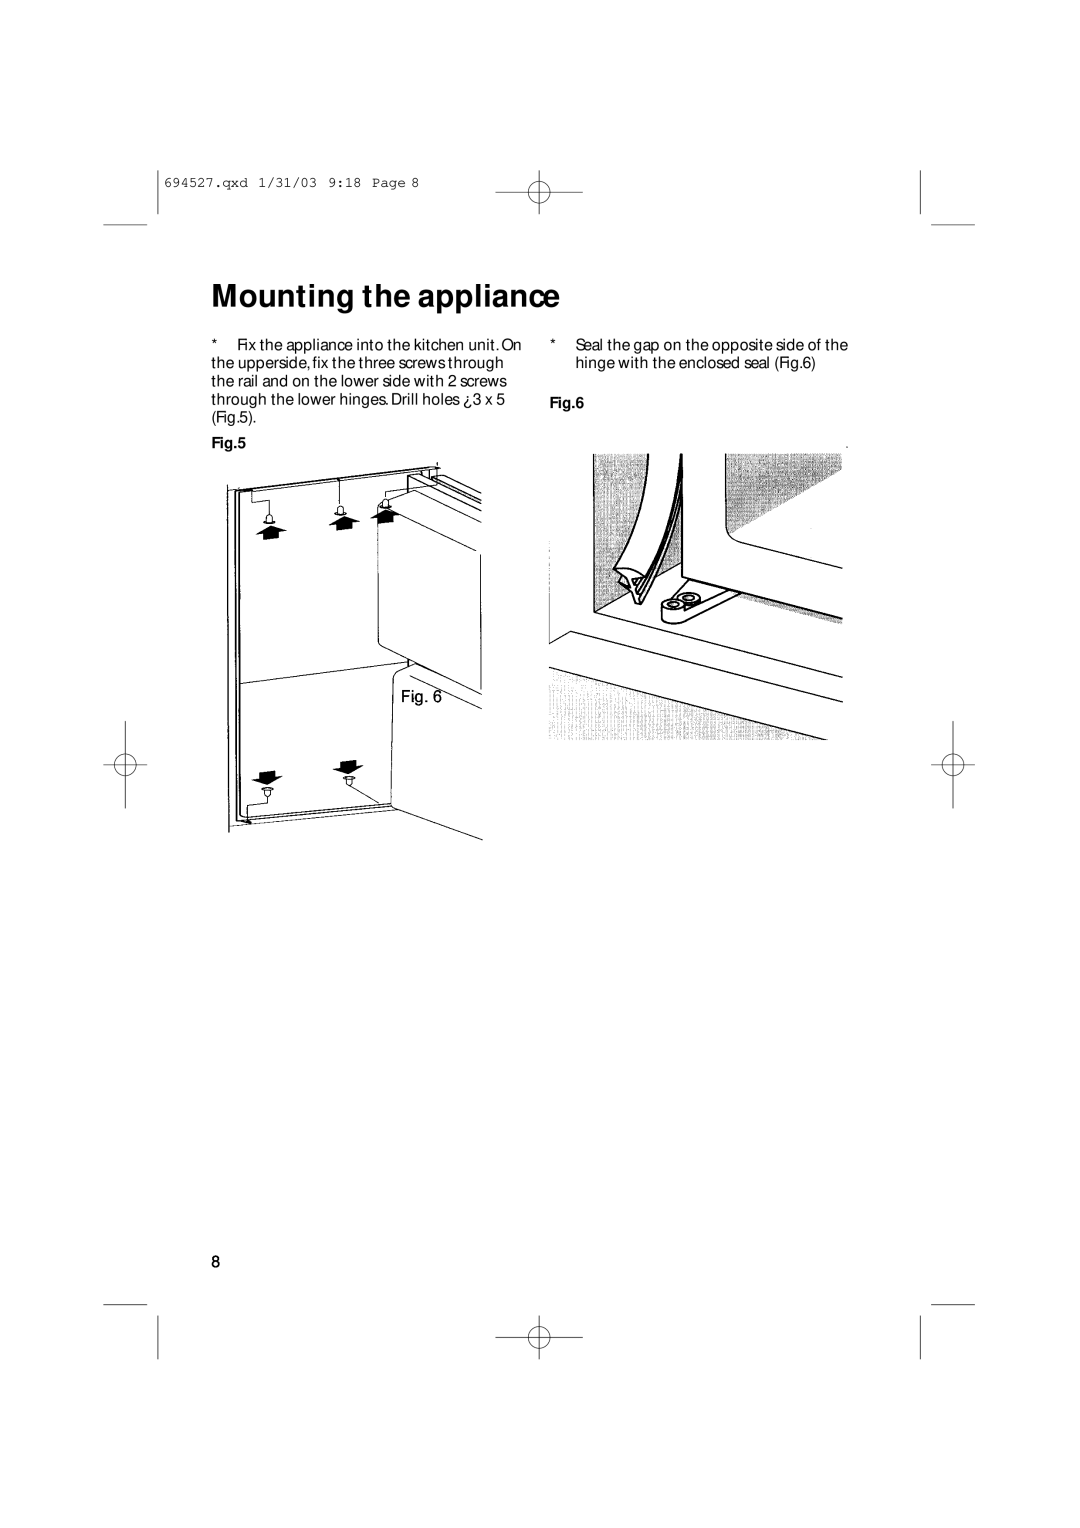 Creda CM 311 I manual Mounting the appliance, qxd 1/31/03 918 Page 